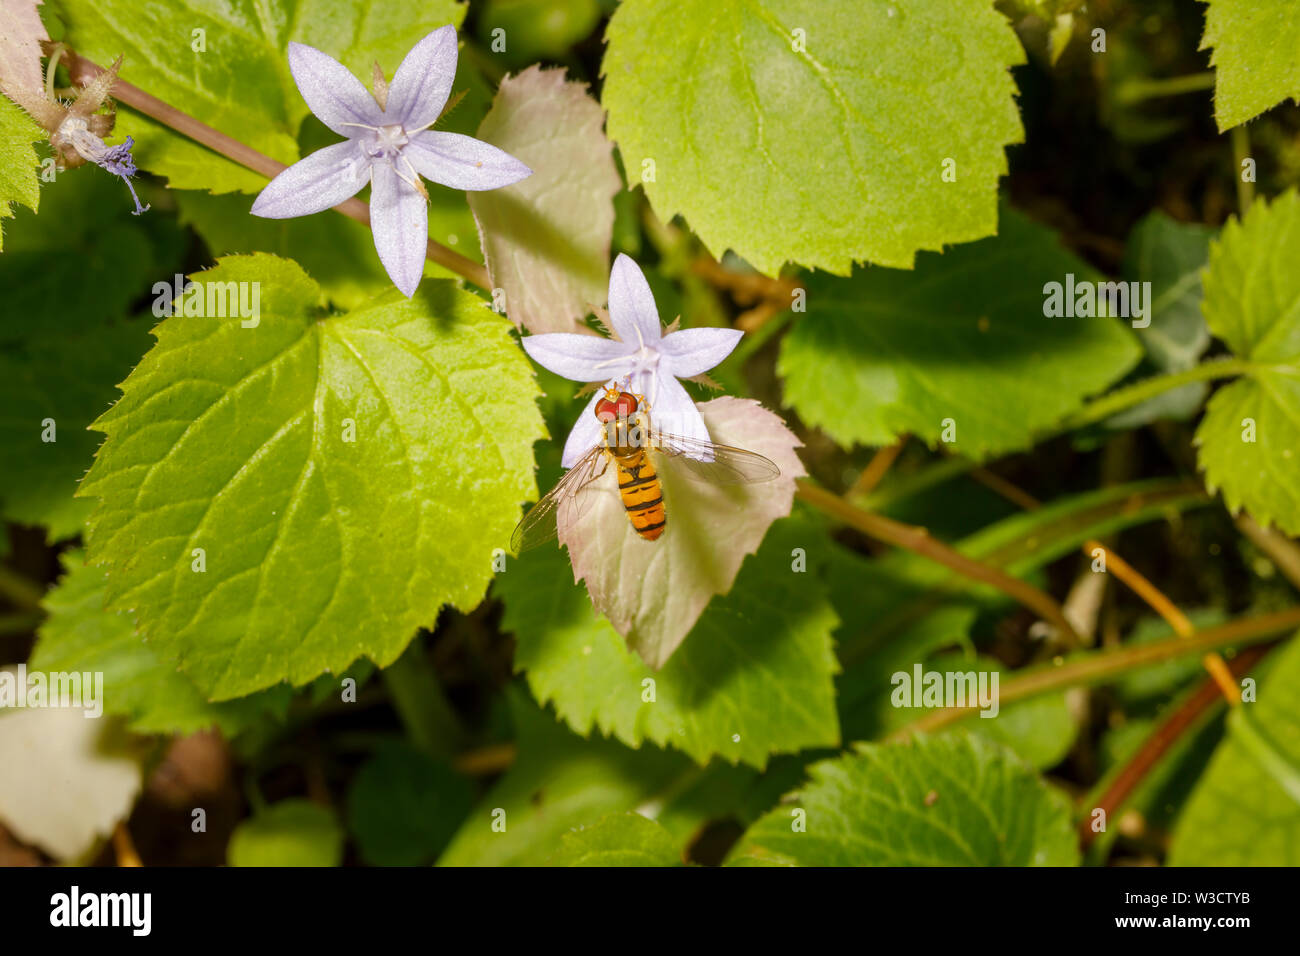 Harmless black and yellow striped wasp mimic hoverfly landed on and feeding (nectaring) from a campanula flower in an English garden in summer Stock Photo